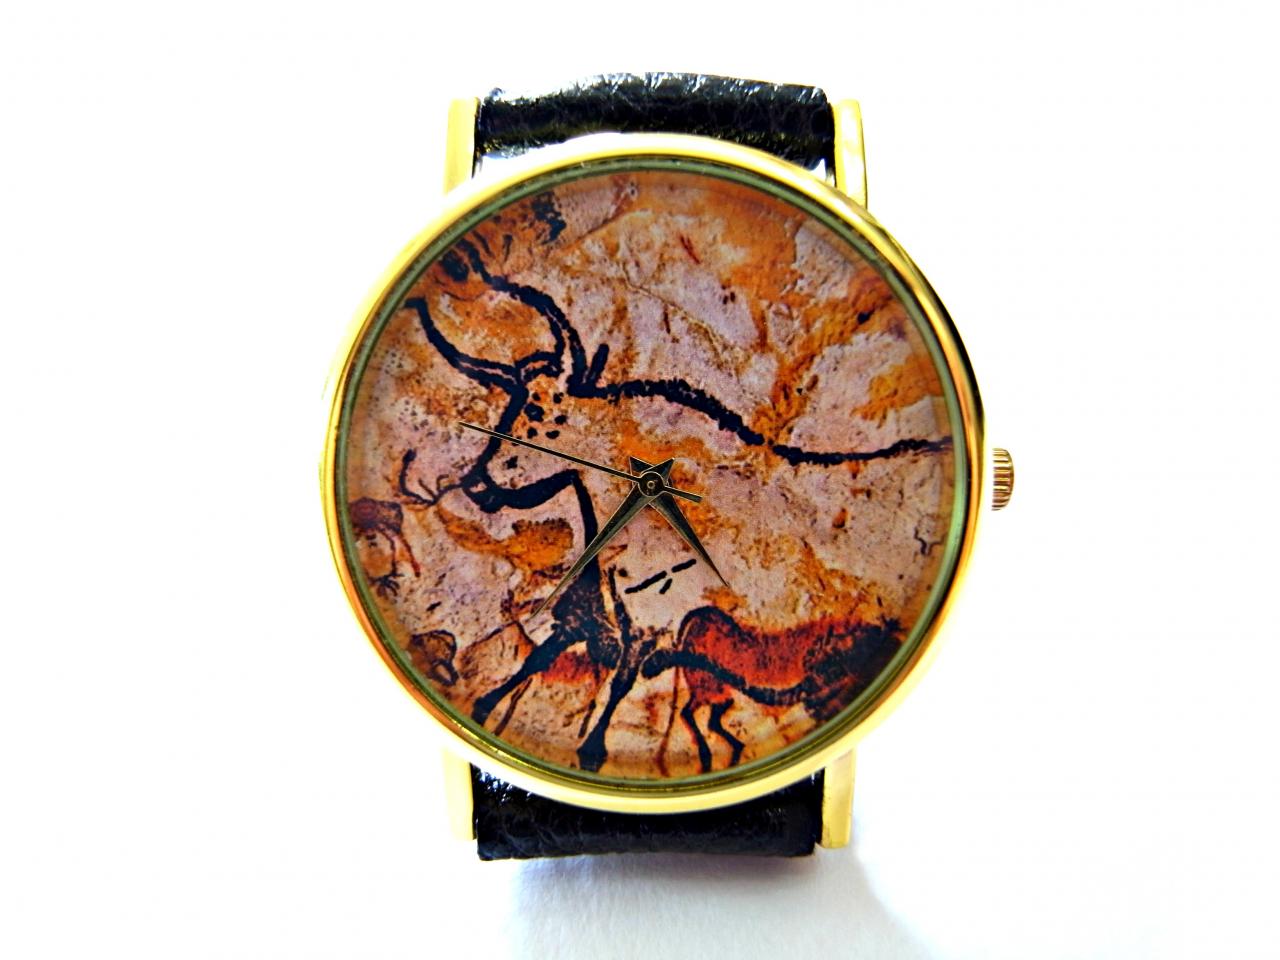 Cow, Cave Art Leather Wrist Watch, Woman Man Lady Unisex Watch, Genuine Leather Handmade Unique Watch #103